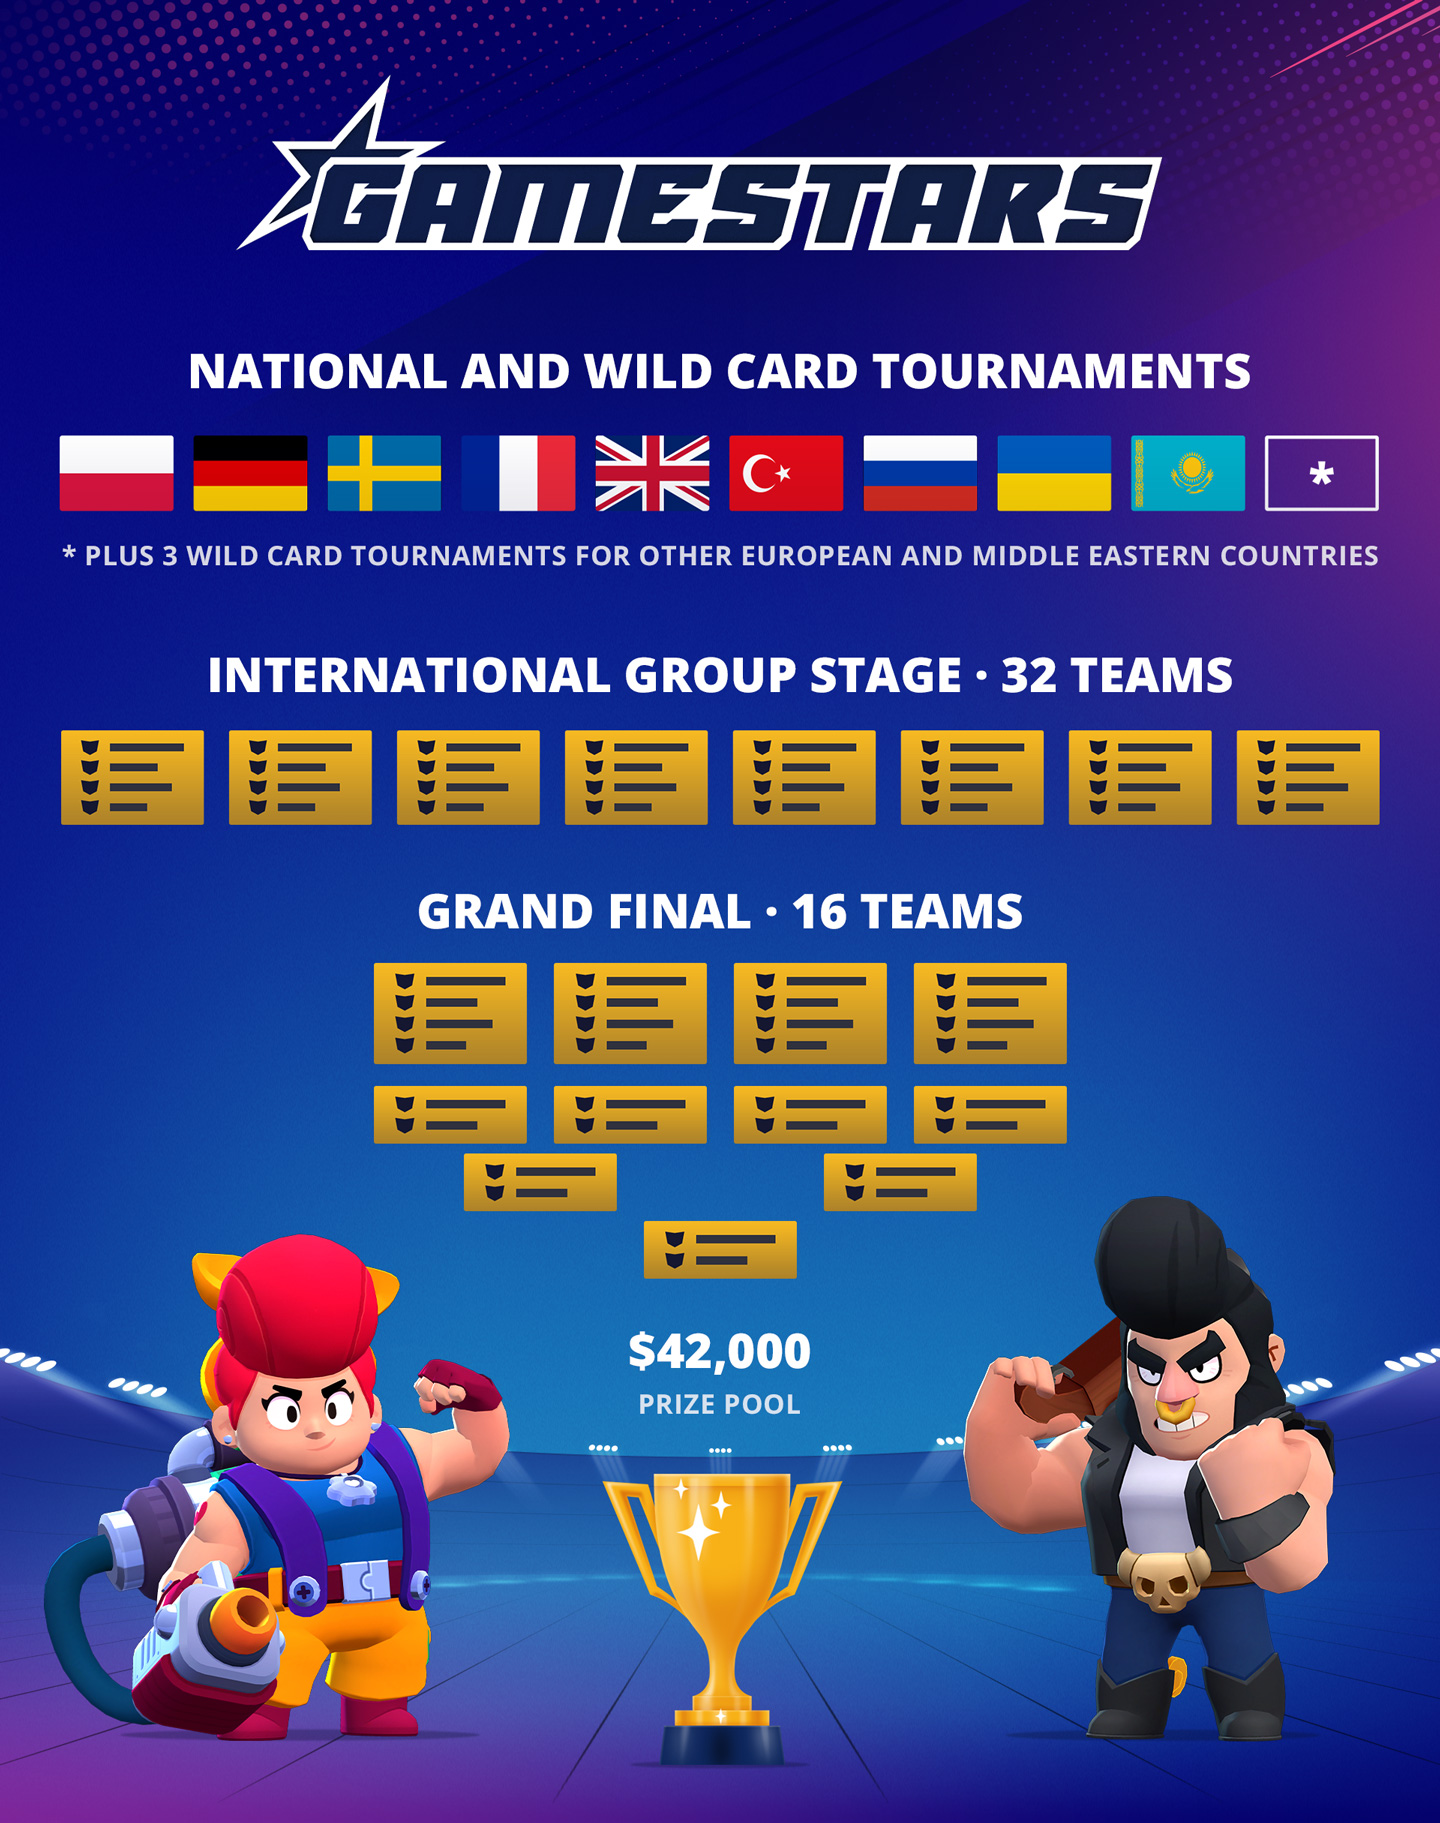 Starladder To Launch The First Season Of Brawl Stars Gamestars League For The Teams Gamestars - brawl stars android release country